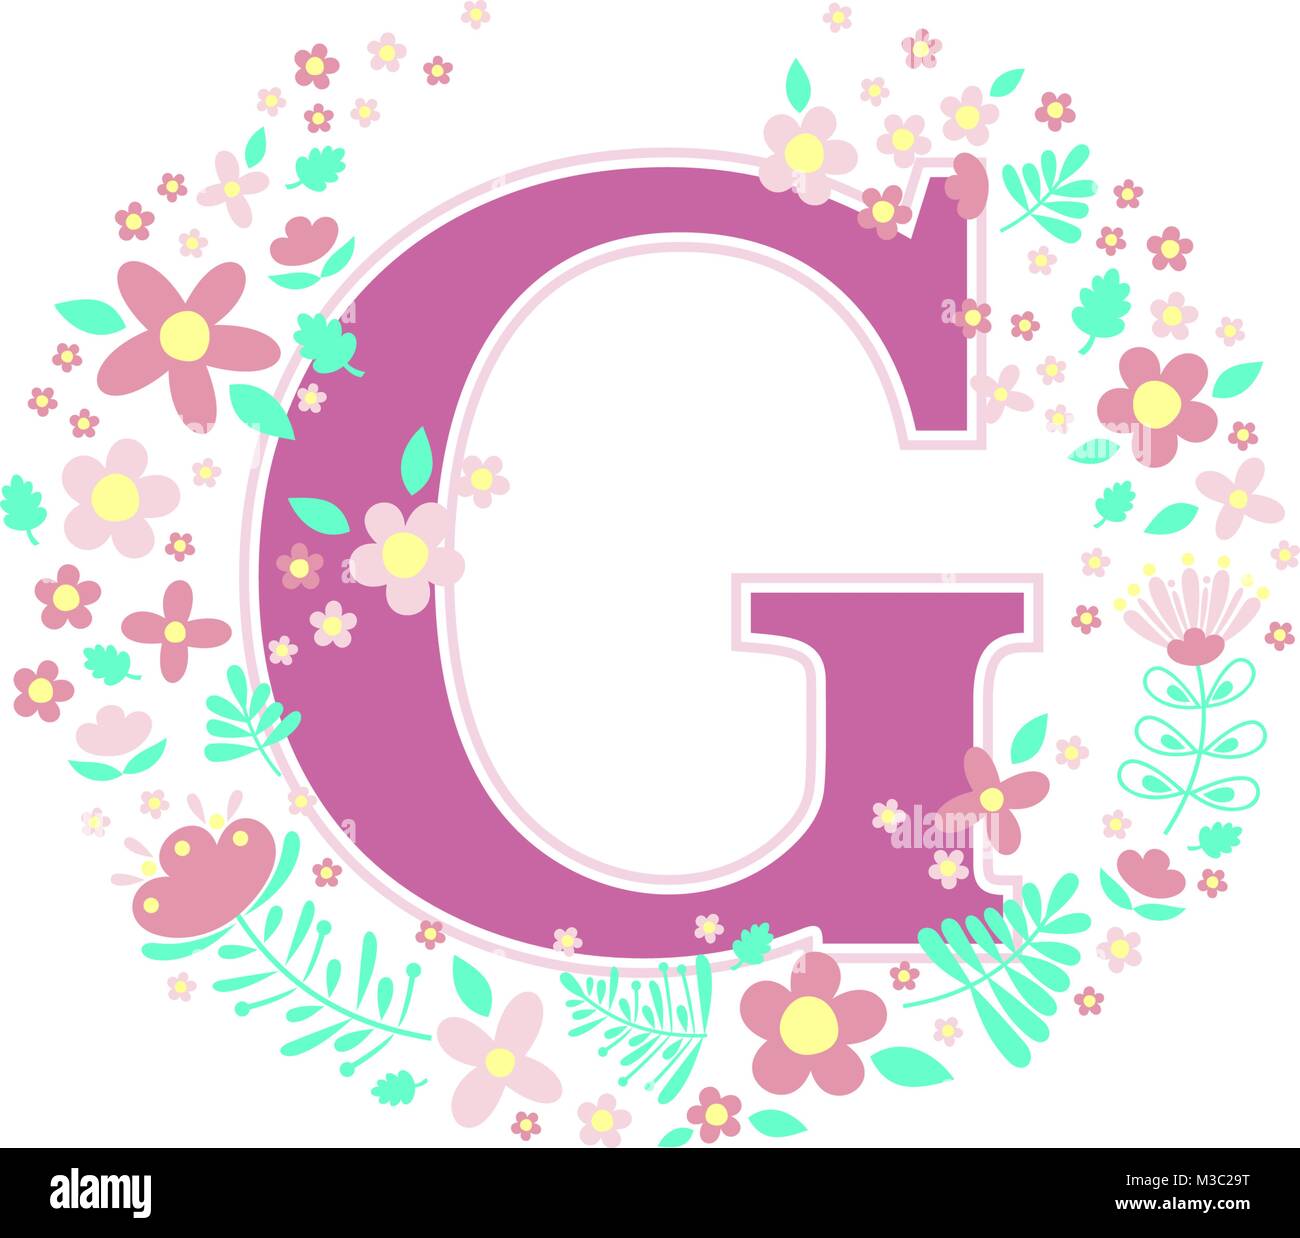 Letter G Flowers Stock Photos & Letter G Flowers Stock Images - Alamy